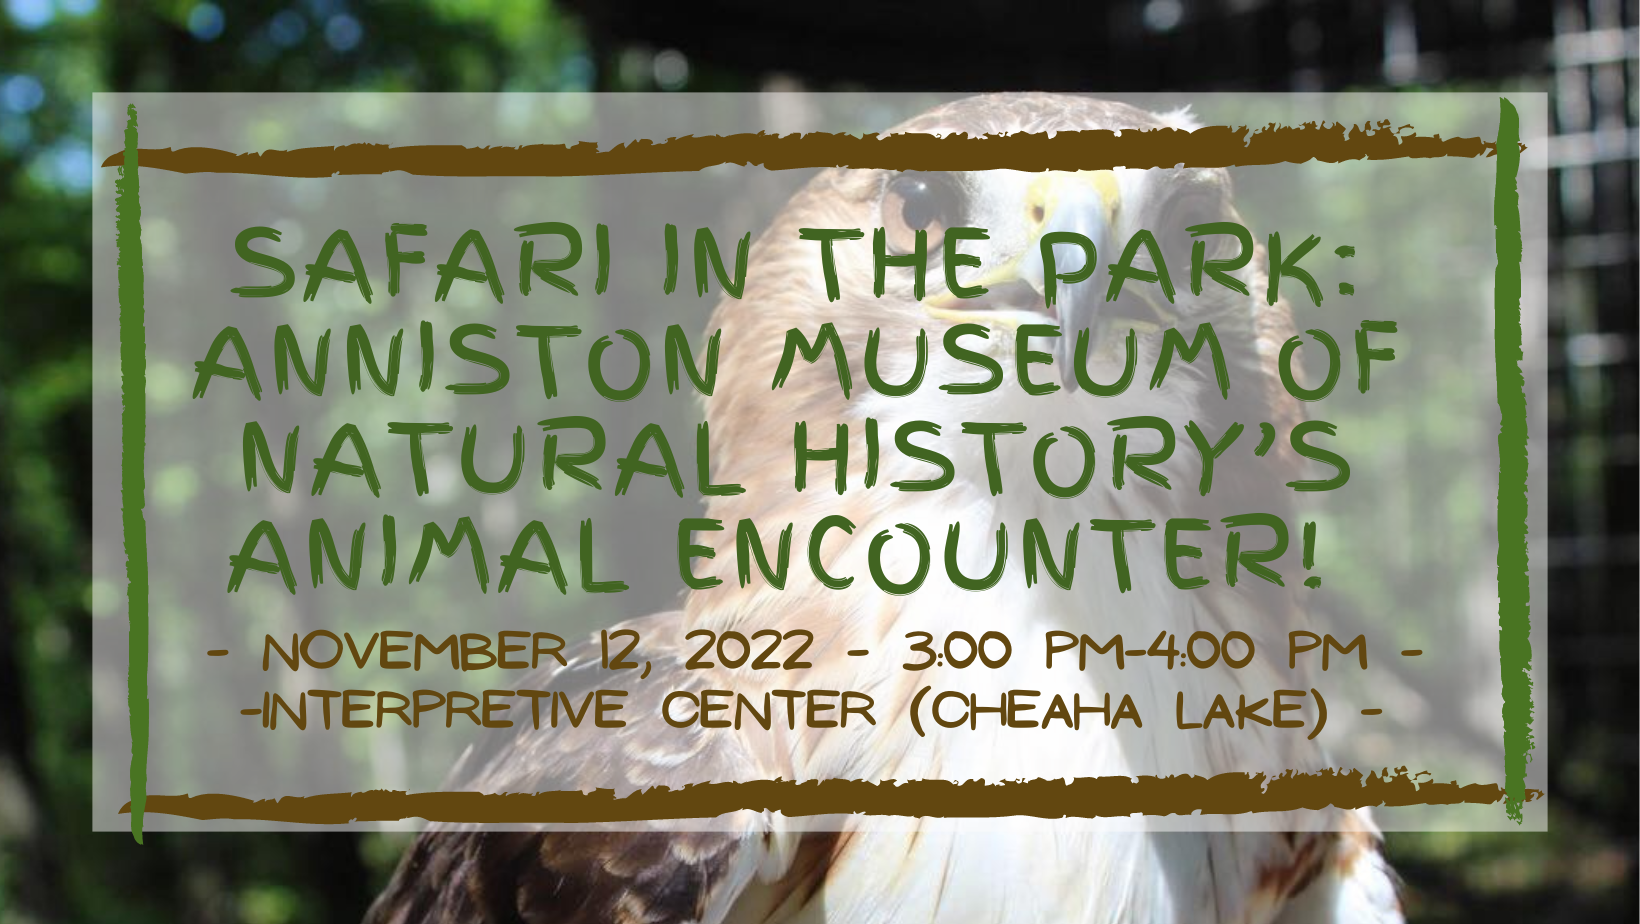 SAFARI IN THE PARK:  Anniston Museum of Natural History’s Animal Encounter!  